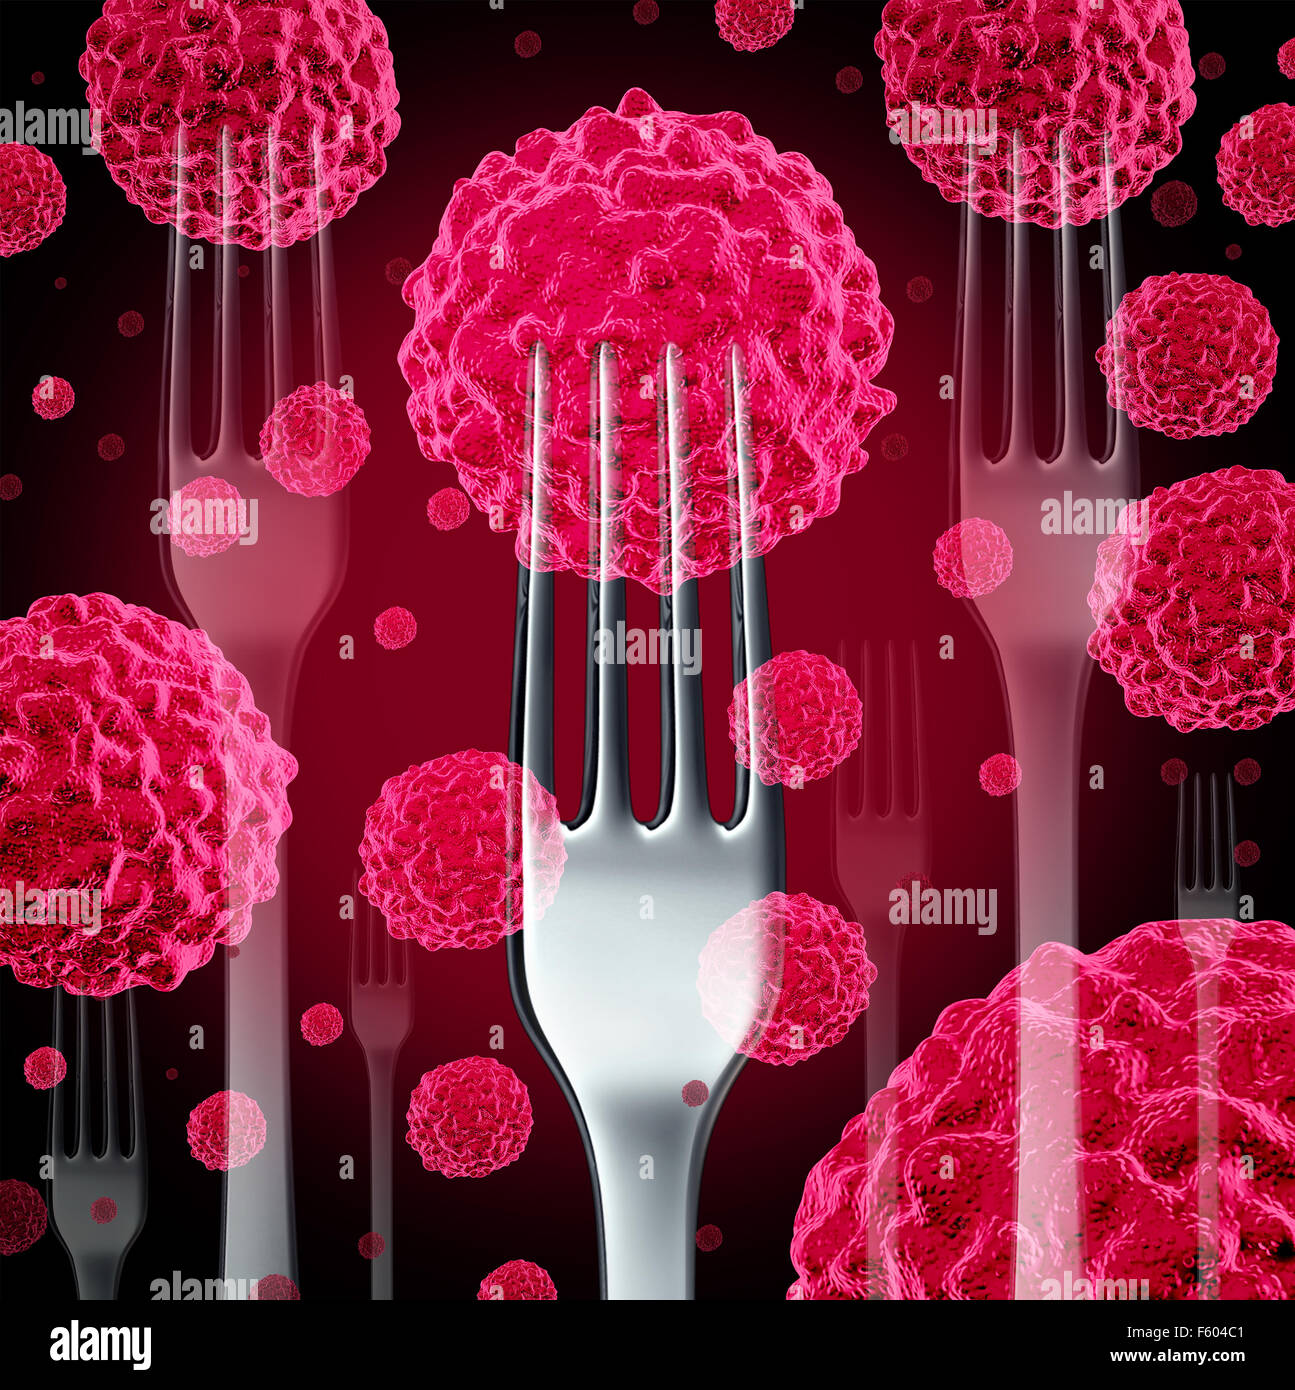 Food cancer concept as a group of cancerous cells with dinner forks as a diet health risk metaphor for the danger. Stock Photo